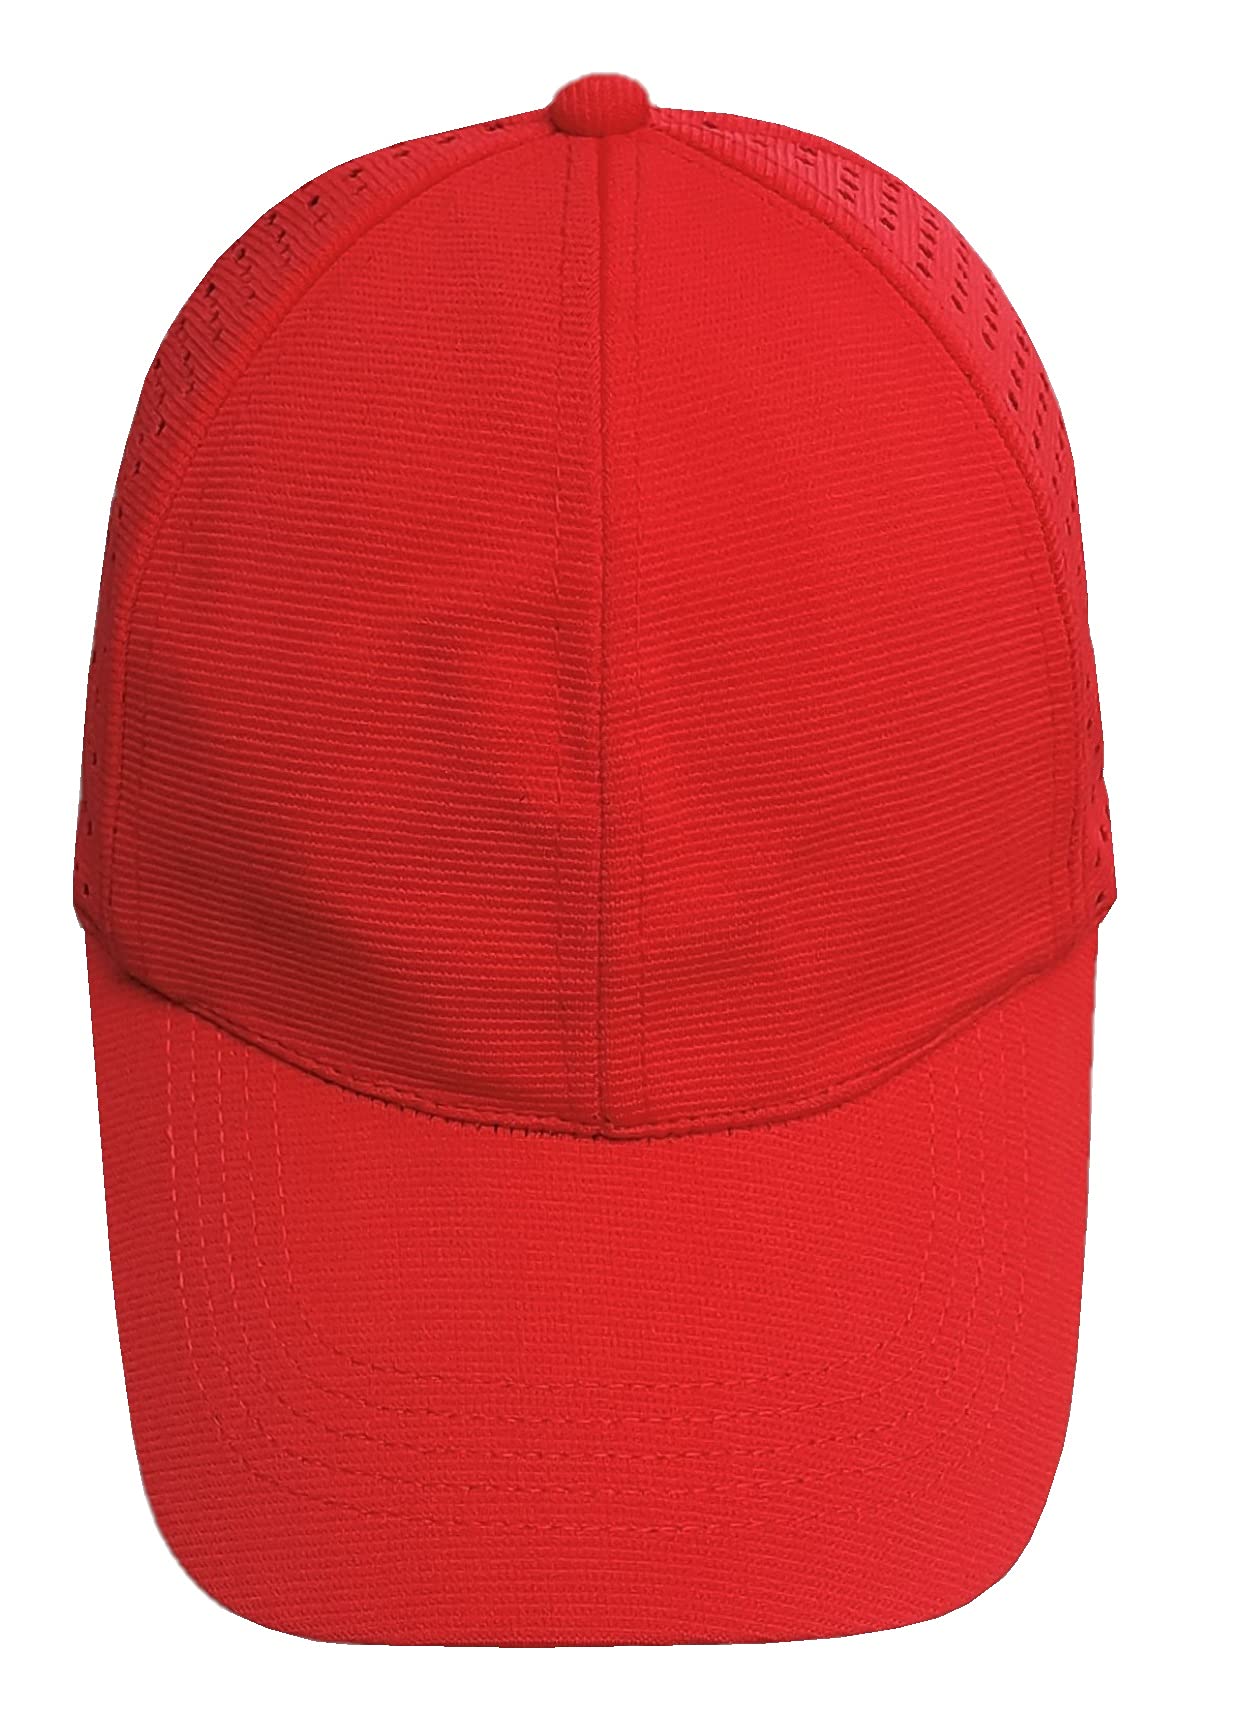 Sports Plain red Racing Fancy mesh Dance Hats Party caps for Men and Boys